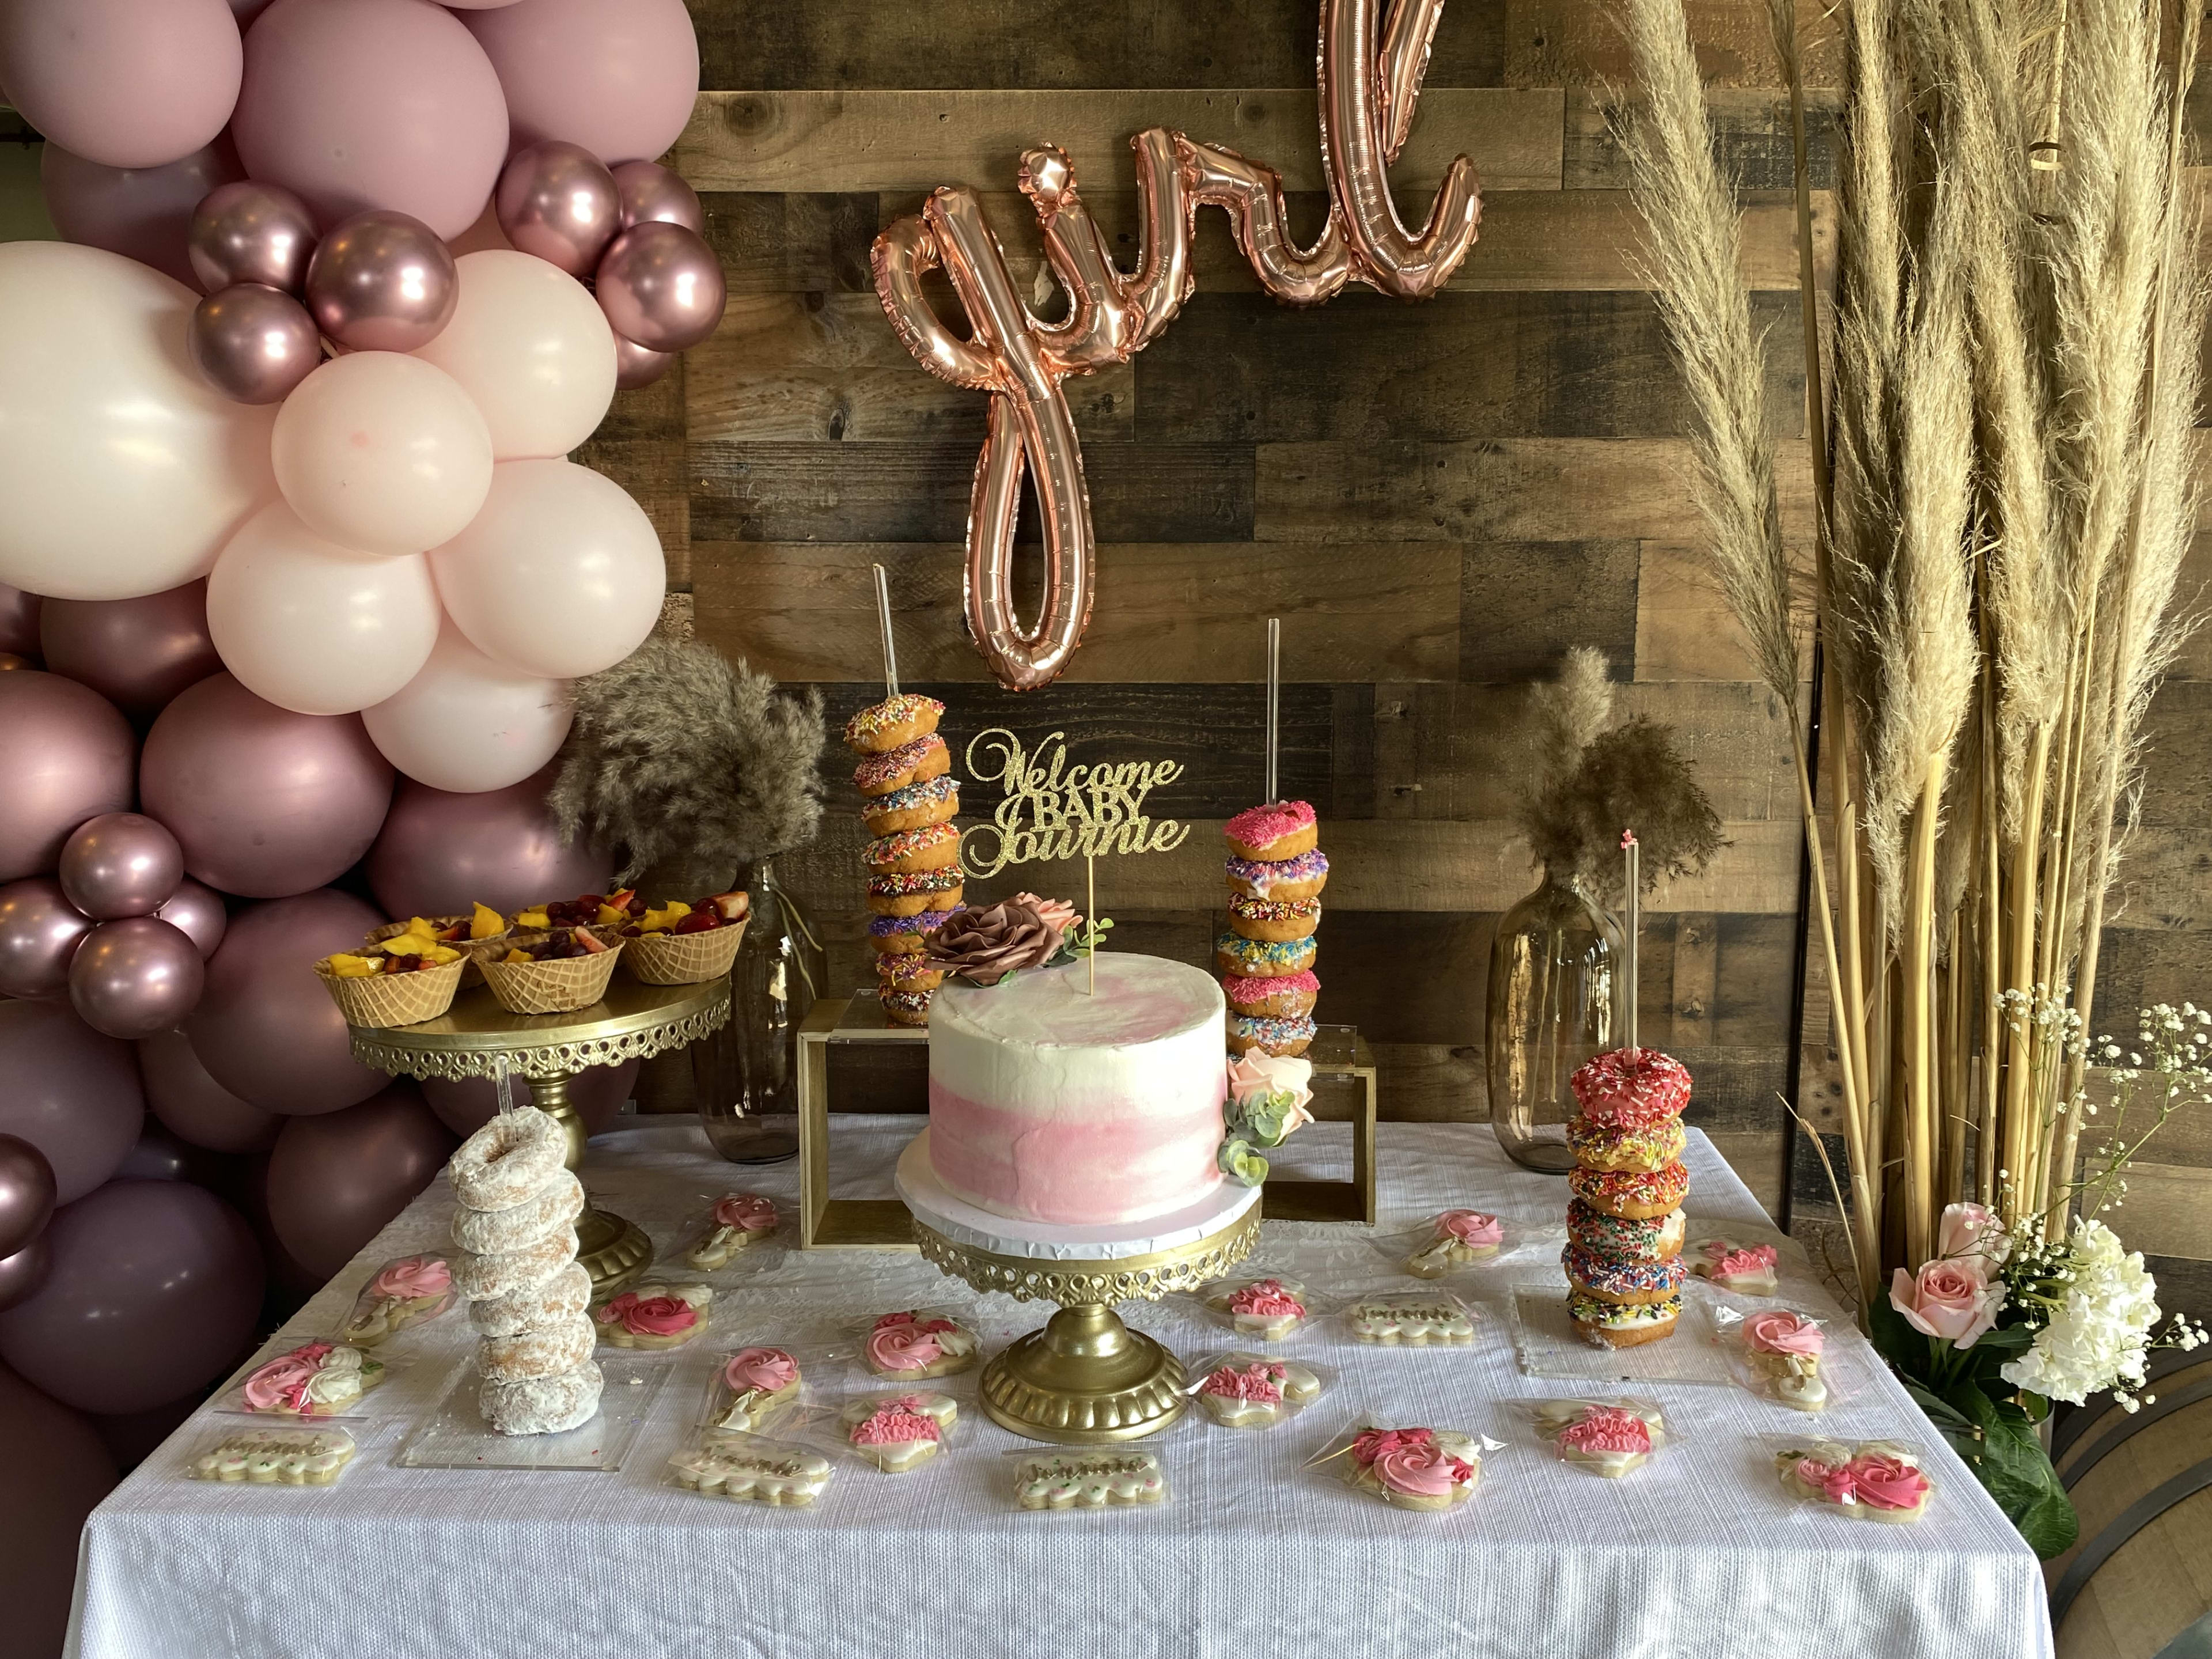 A boho-inspired table adorned with a rustic pink cake and lots of balloons, perfect for a baby shower celebration.